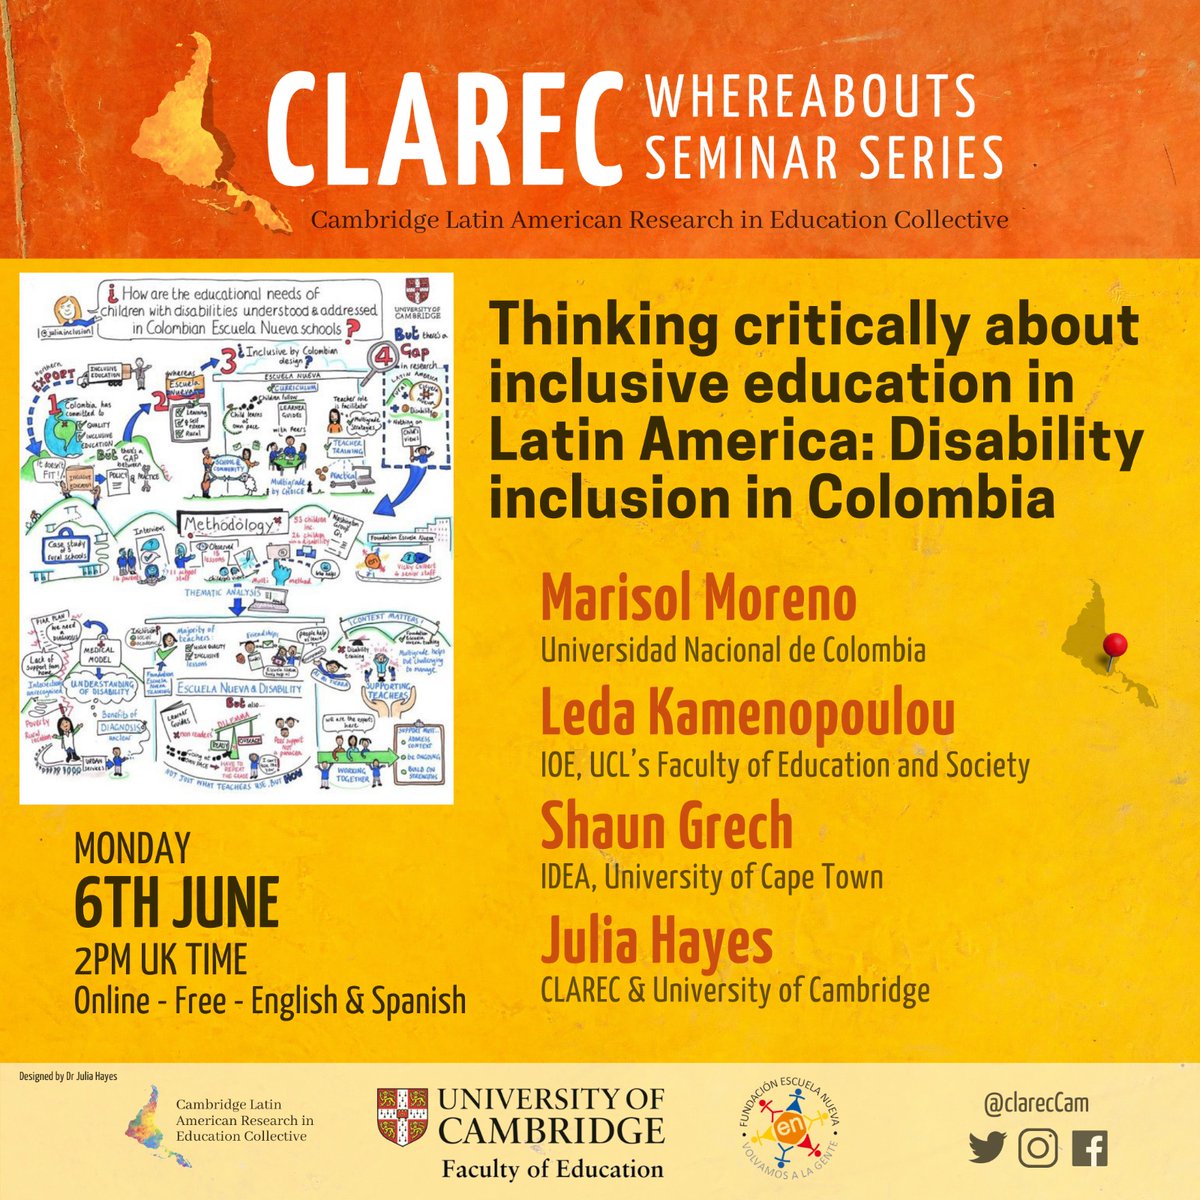 Can't wait to share my PhD research after presentation by the fabulous @kamenopoulou @ShaunGrech who will give a preview of their latest research on inclusive education in Latin America @ClarecCam @CLAS_Cam eventbrite.co.uk/e/thinking-cri…